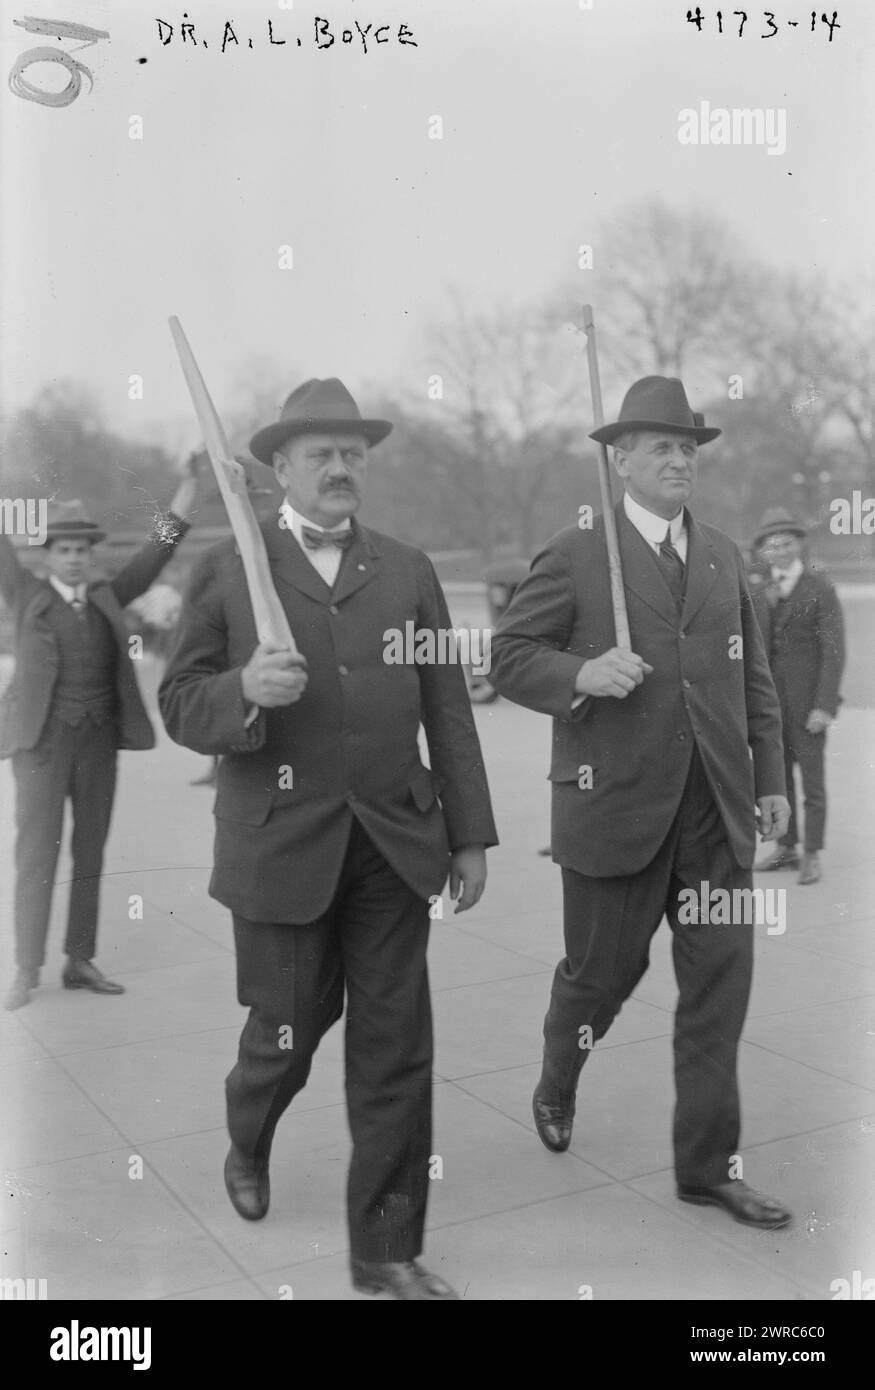 Dr. A.L. Boyce, Photograph shows Adolphe Lippe Boyce, in charge of civilian training at Governors Island, at the U.S. Capitol to support passage of universal training act, 1917 March, United States, District of Columbia, Washington (D.C.), Glass negatives, 1 negative: glass Stock Photo